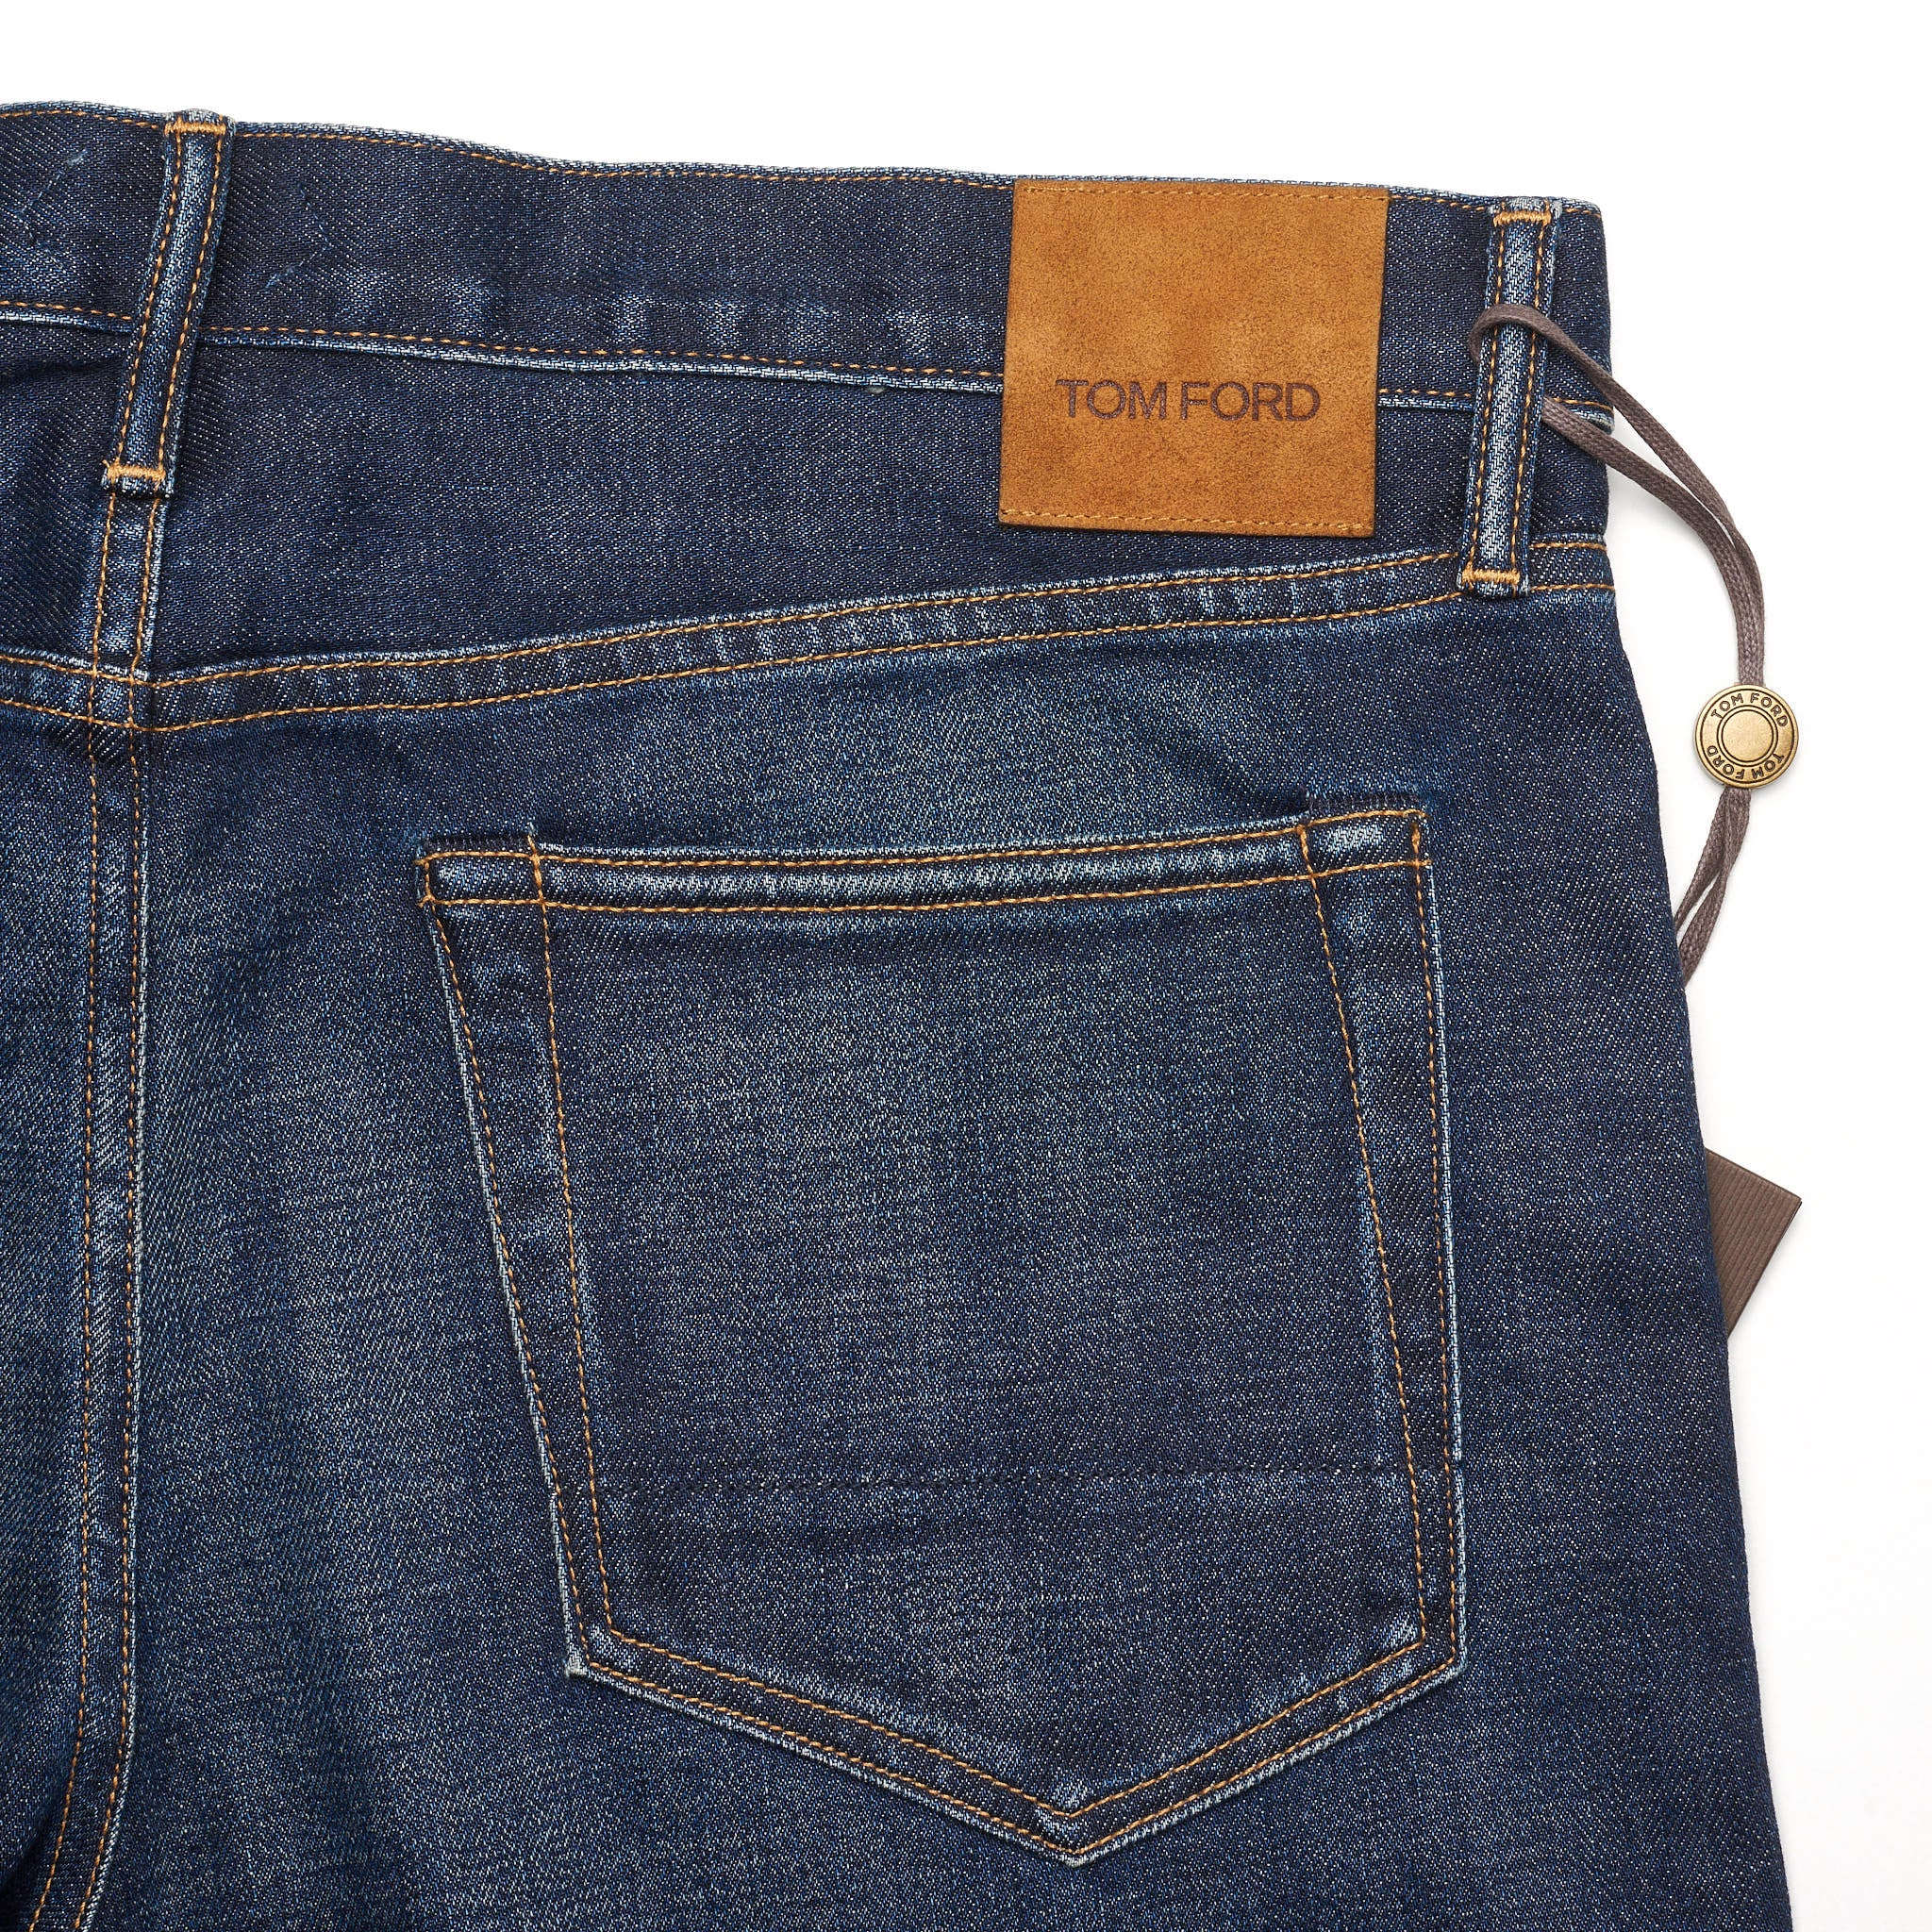 TOM FORD Blue Denim Stretch Selvedge Jeans Pants NEW US 38 Straight Fit